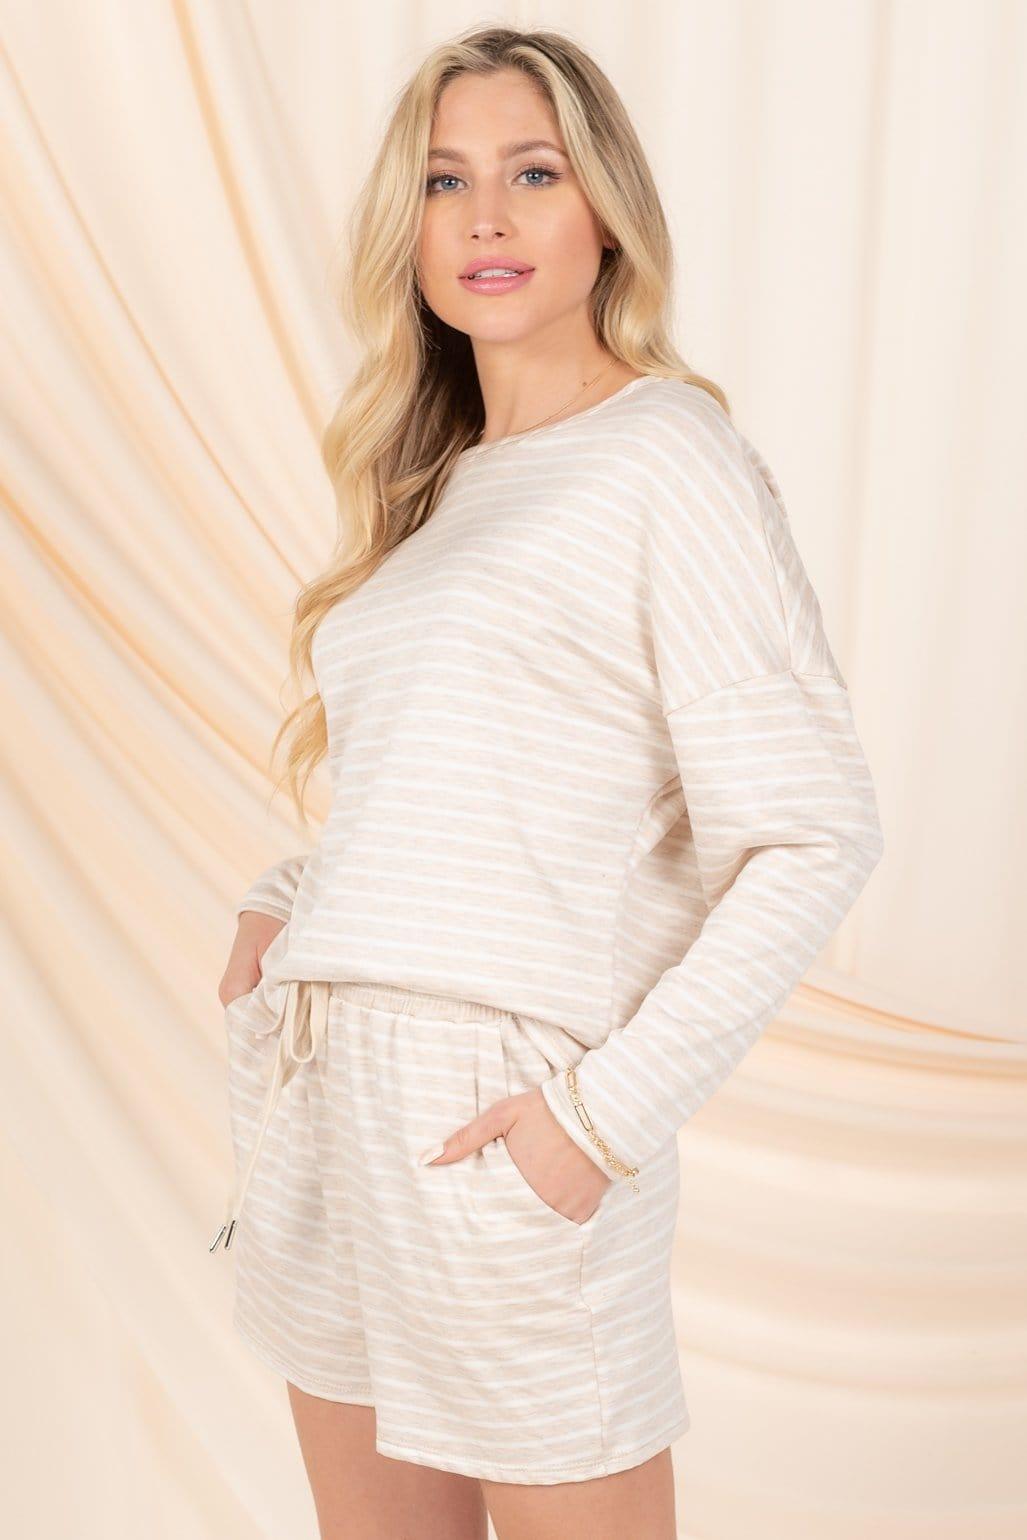 Let's Chill Striped Top - Lovely Brielle